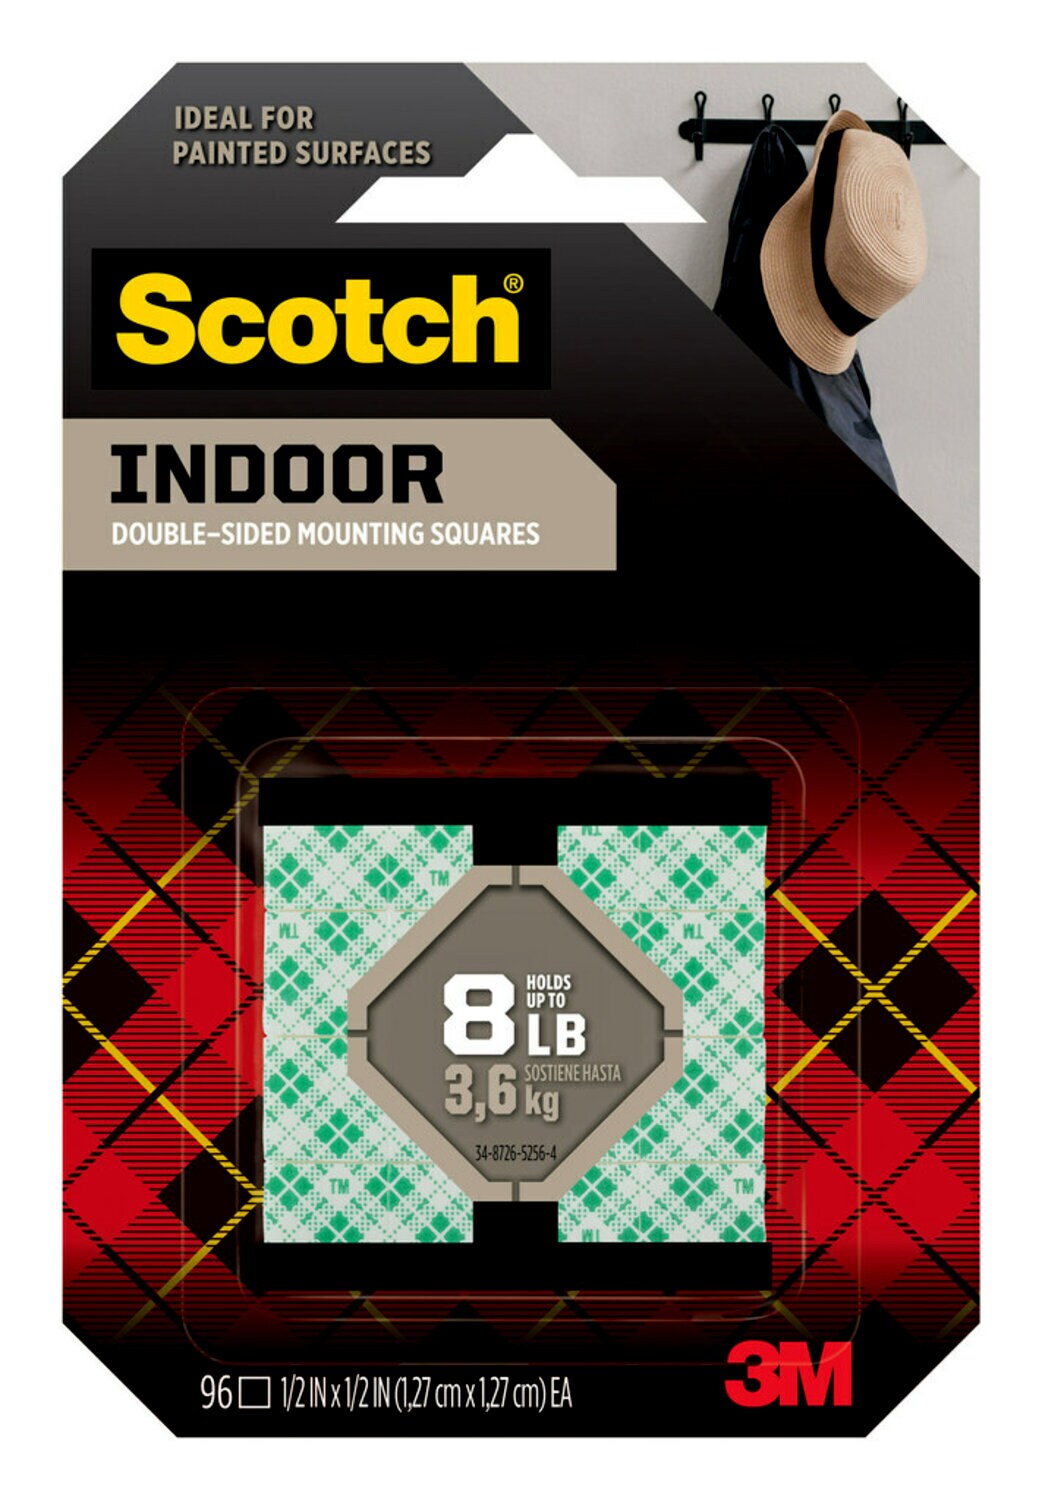 7100241750 - Scotch Indoor Double-Sided Mounting Squares 111S-SQSML-96, 0.5 in x 0.5 in (1.27 cm x 1.27 cm) 96/pk